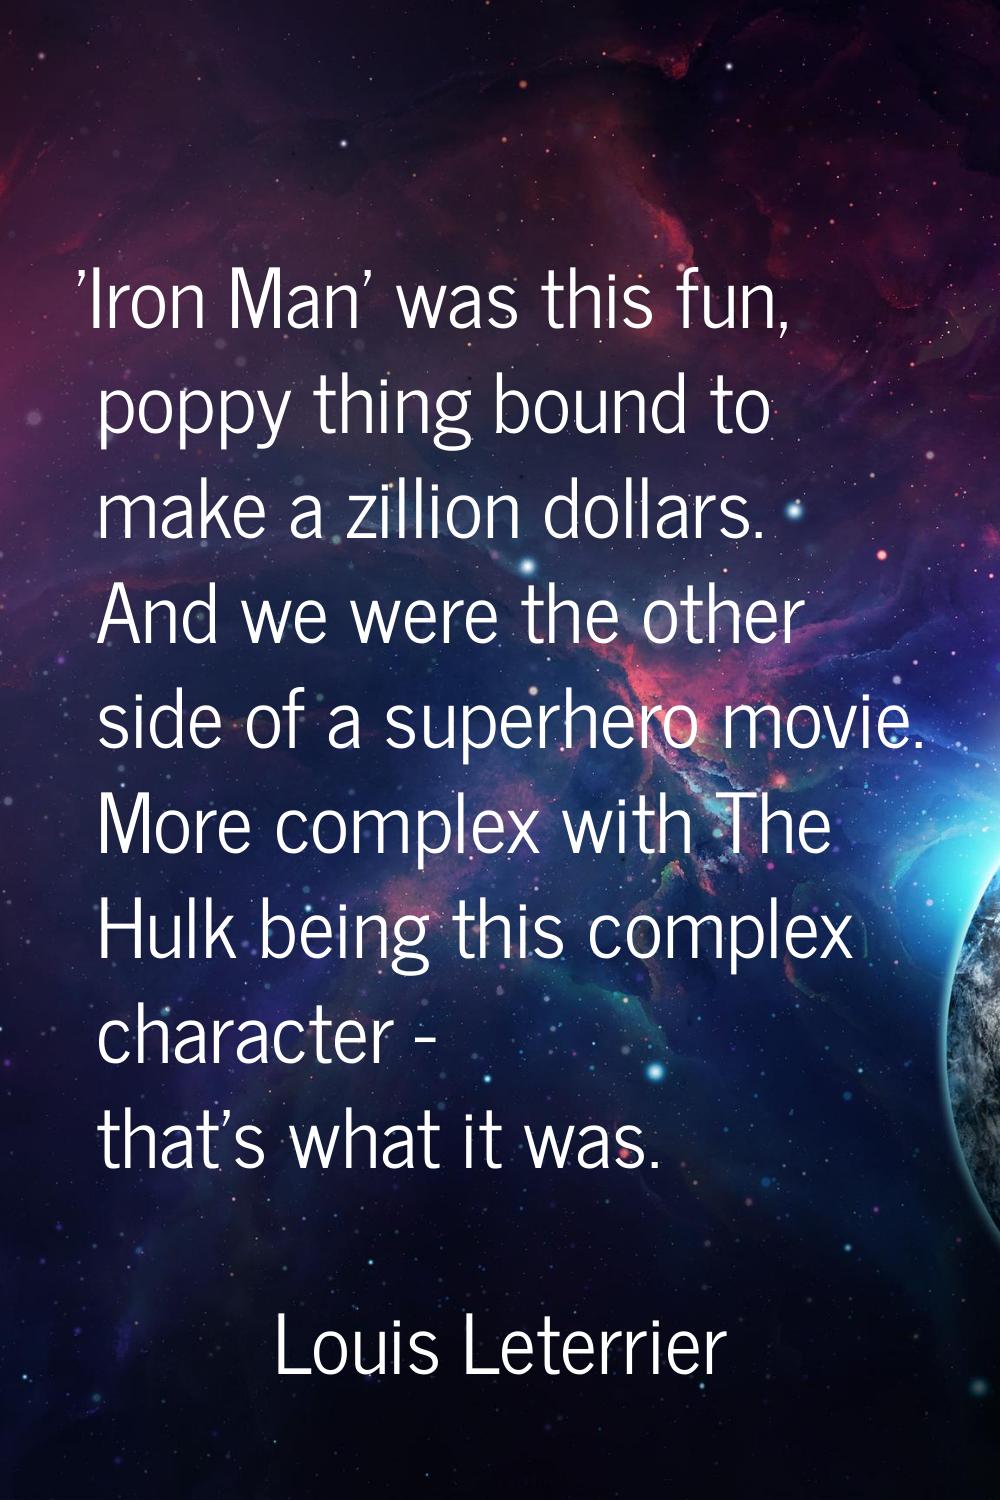 'Iron Man' was this fun, poppy thing bound to make a zillion dollars. And we were the other side of